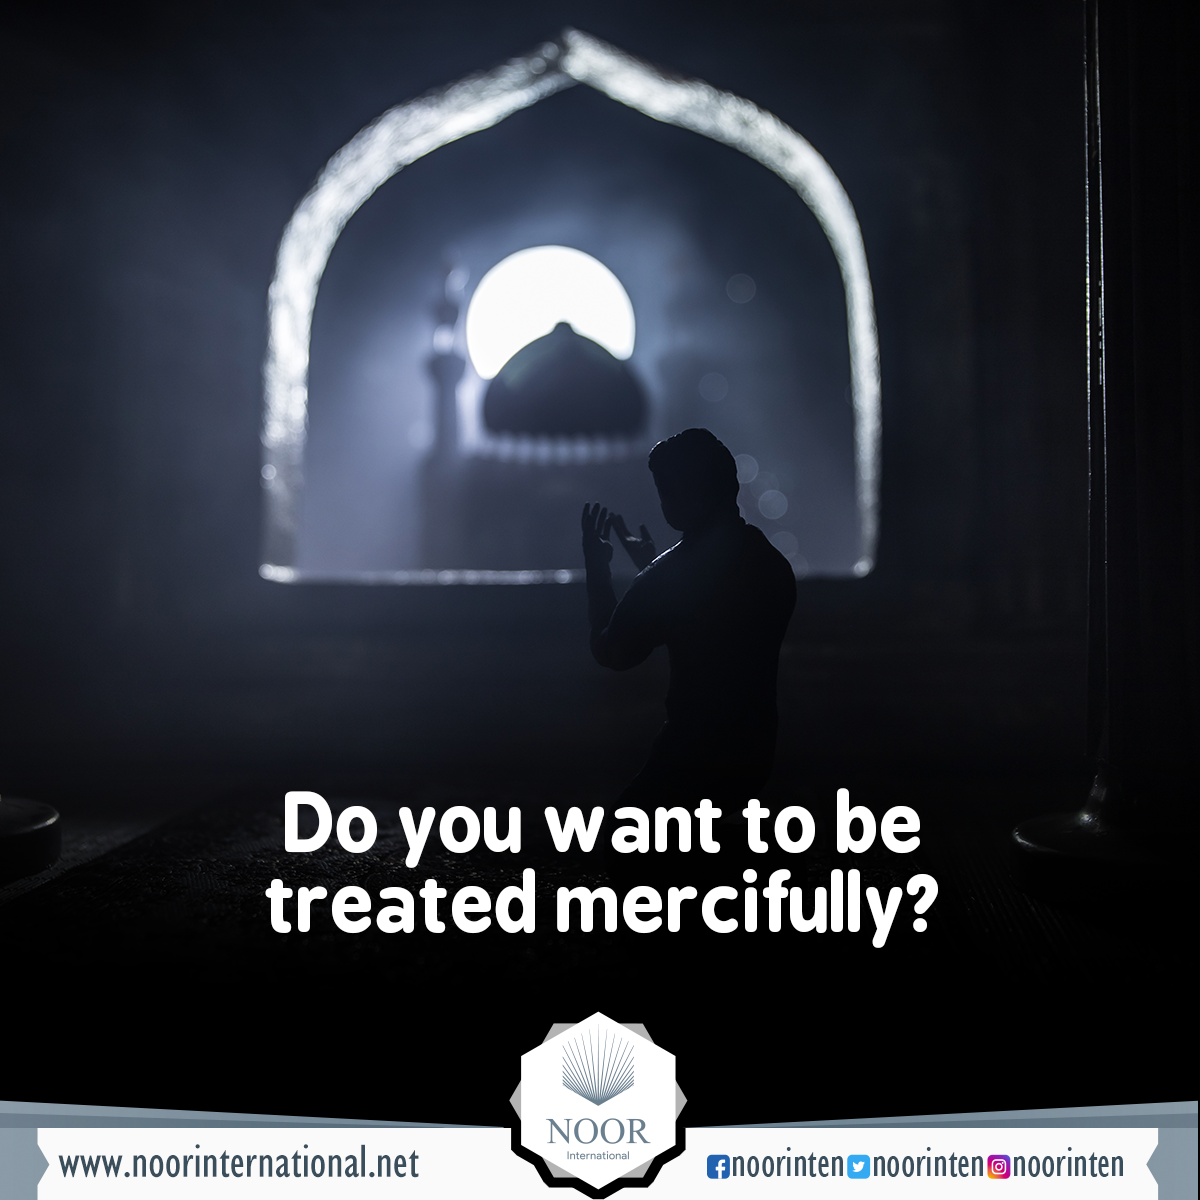 Do you want to be treated mercifully?